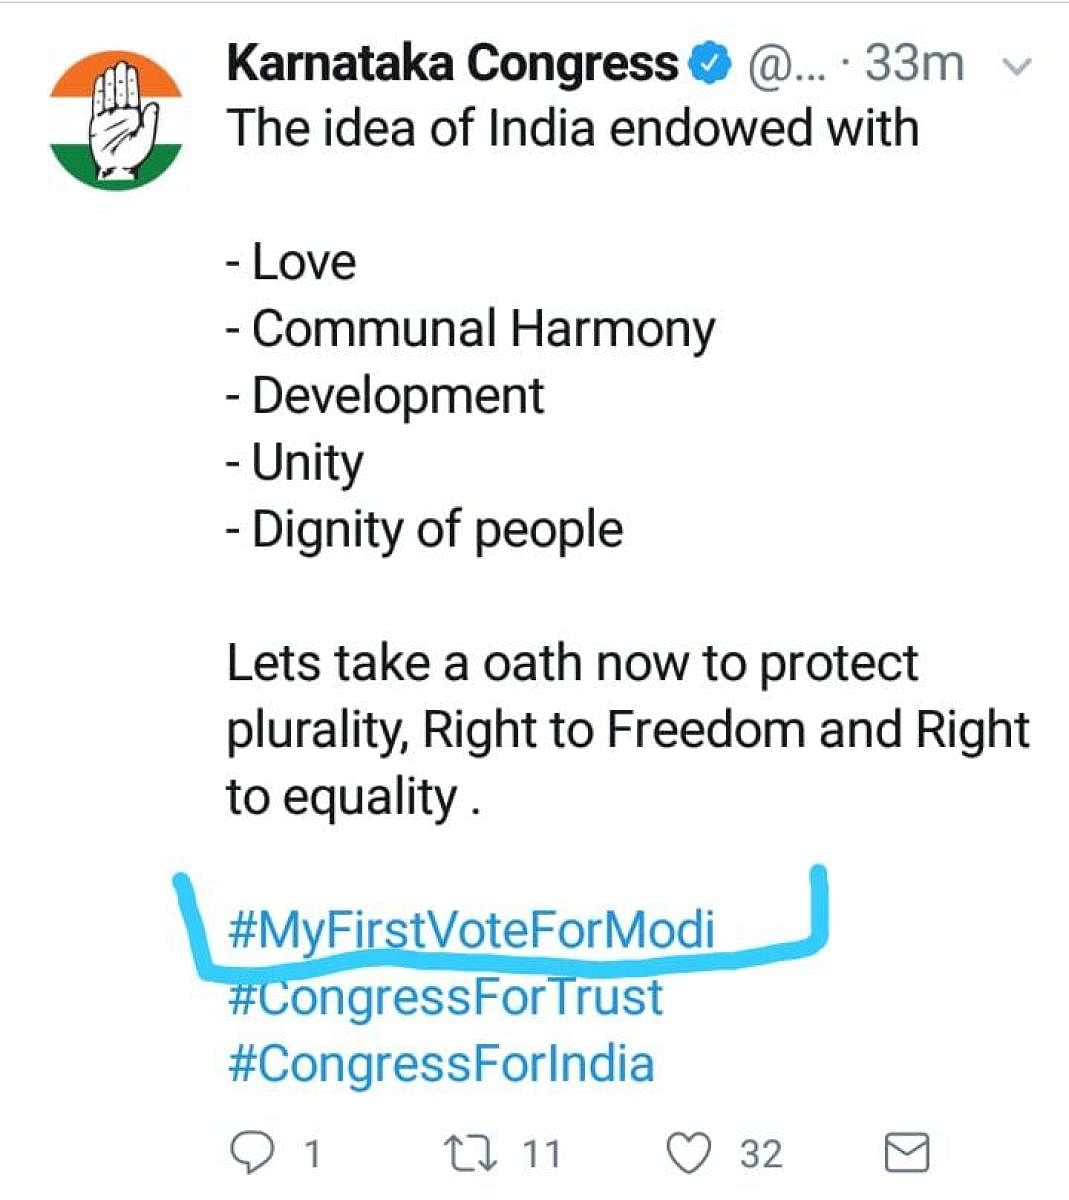 The original tweet deleted by Karnataka Congress from its Twitter handle.